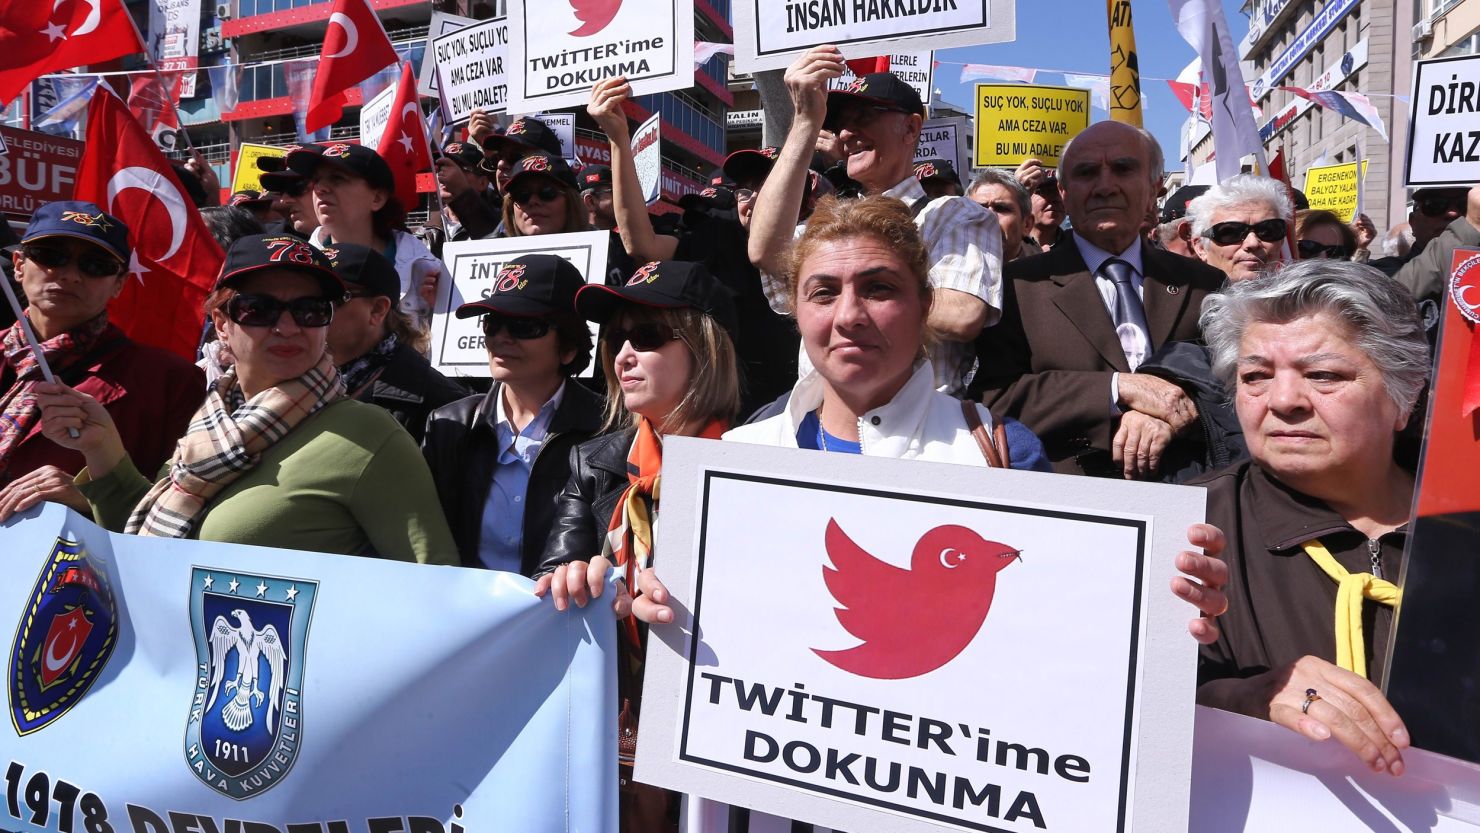 Protesters hold placards reading "Do not touch my Twitter" during a protest against the Turkish government's Twitter ban.